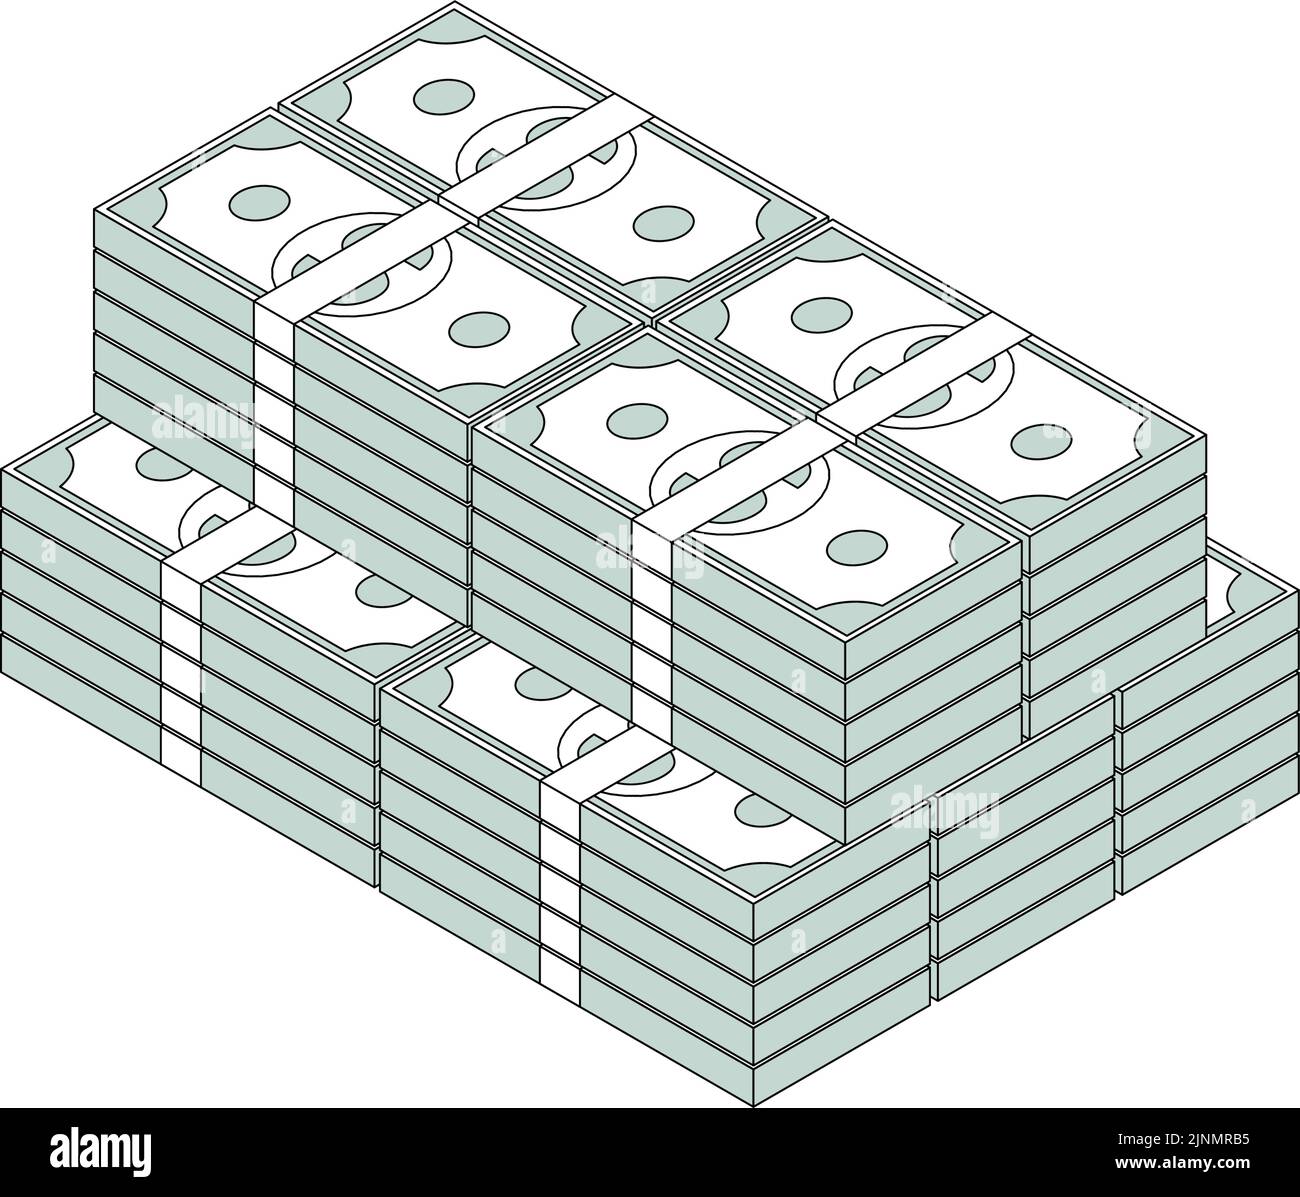 Illustration of 100 dollar bills stacked in an orderly manner, isometric Stock Vector